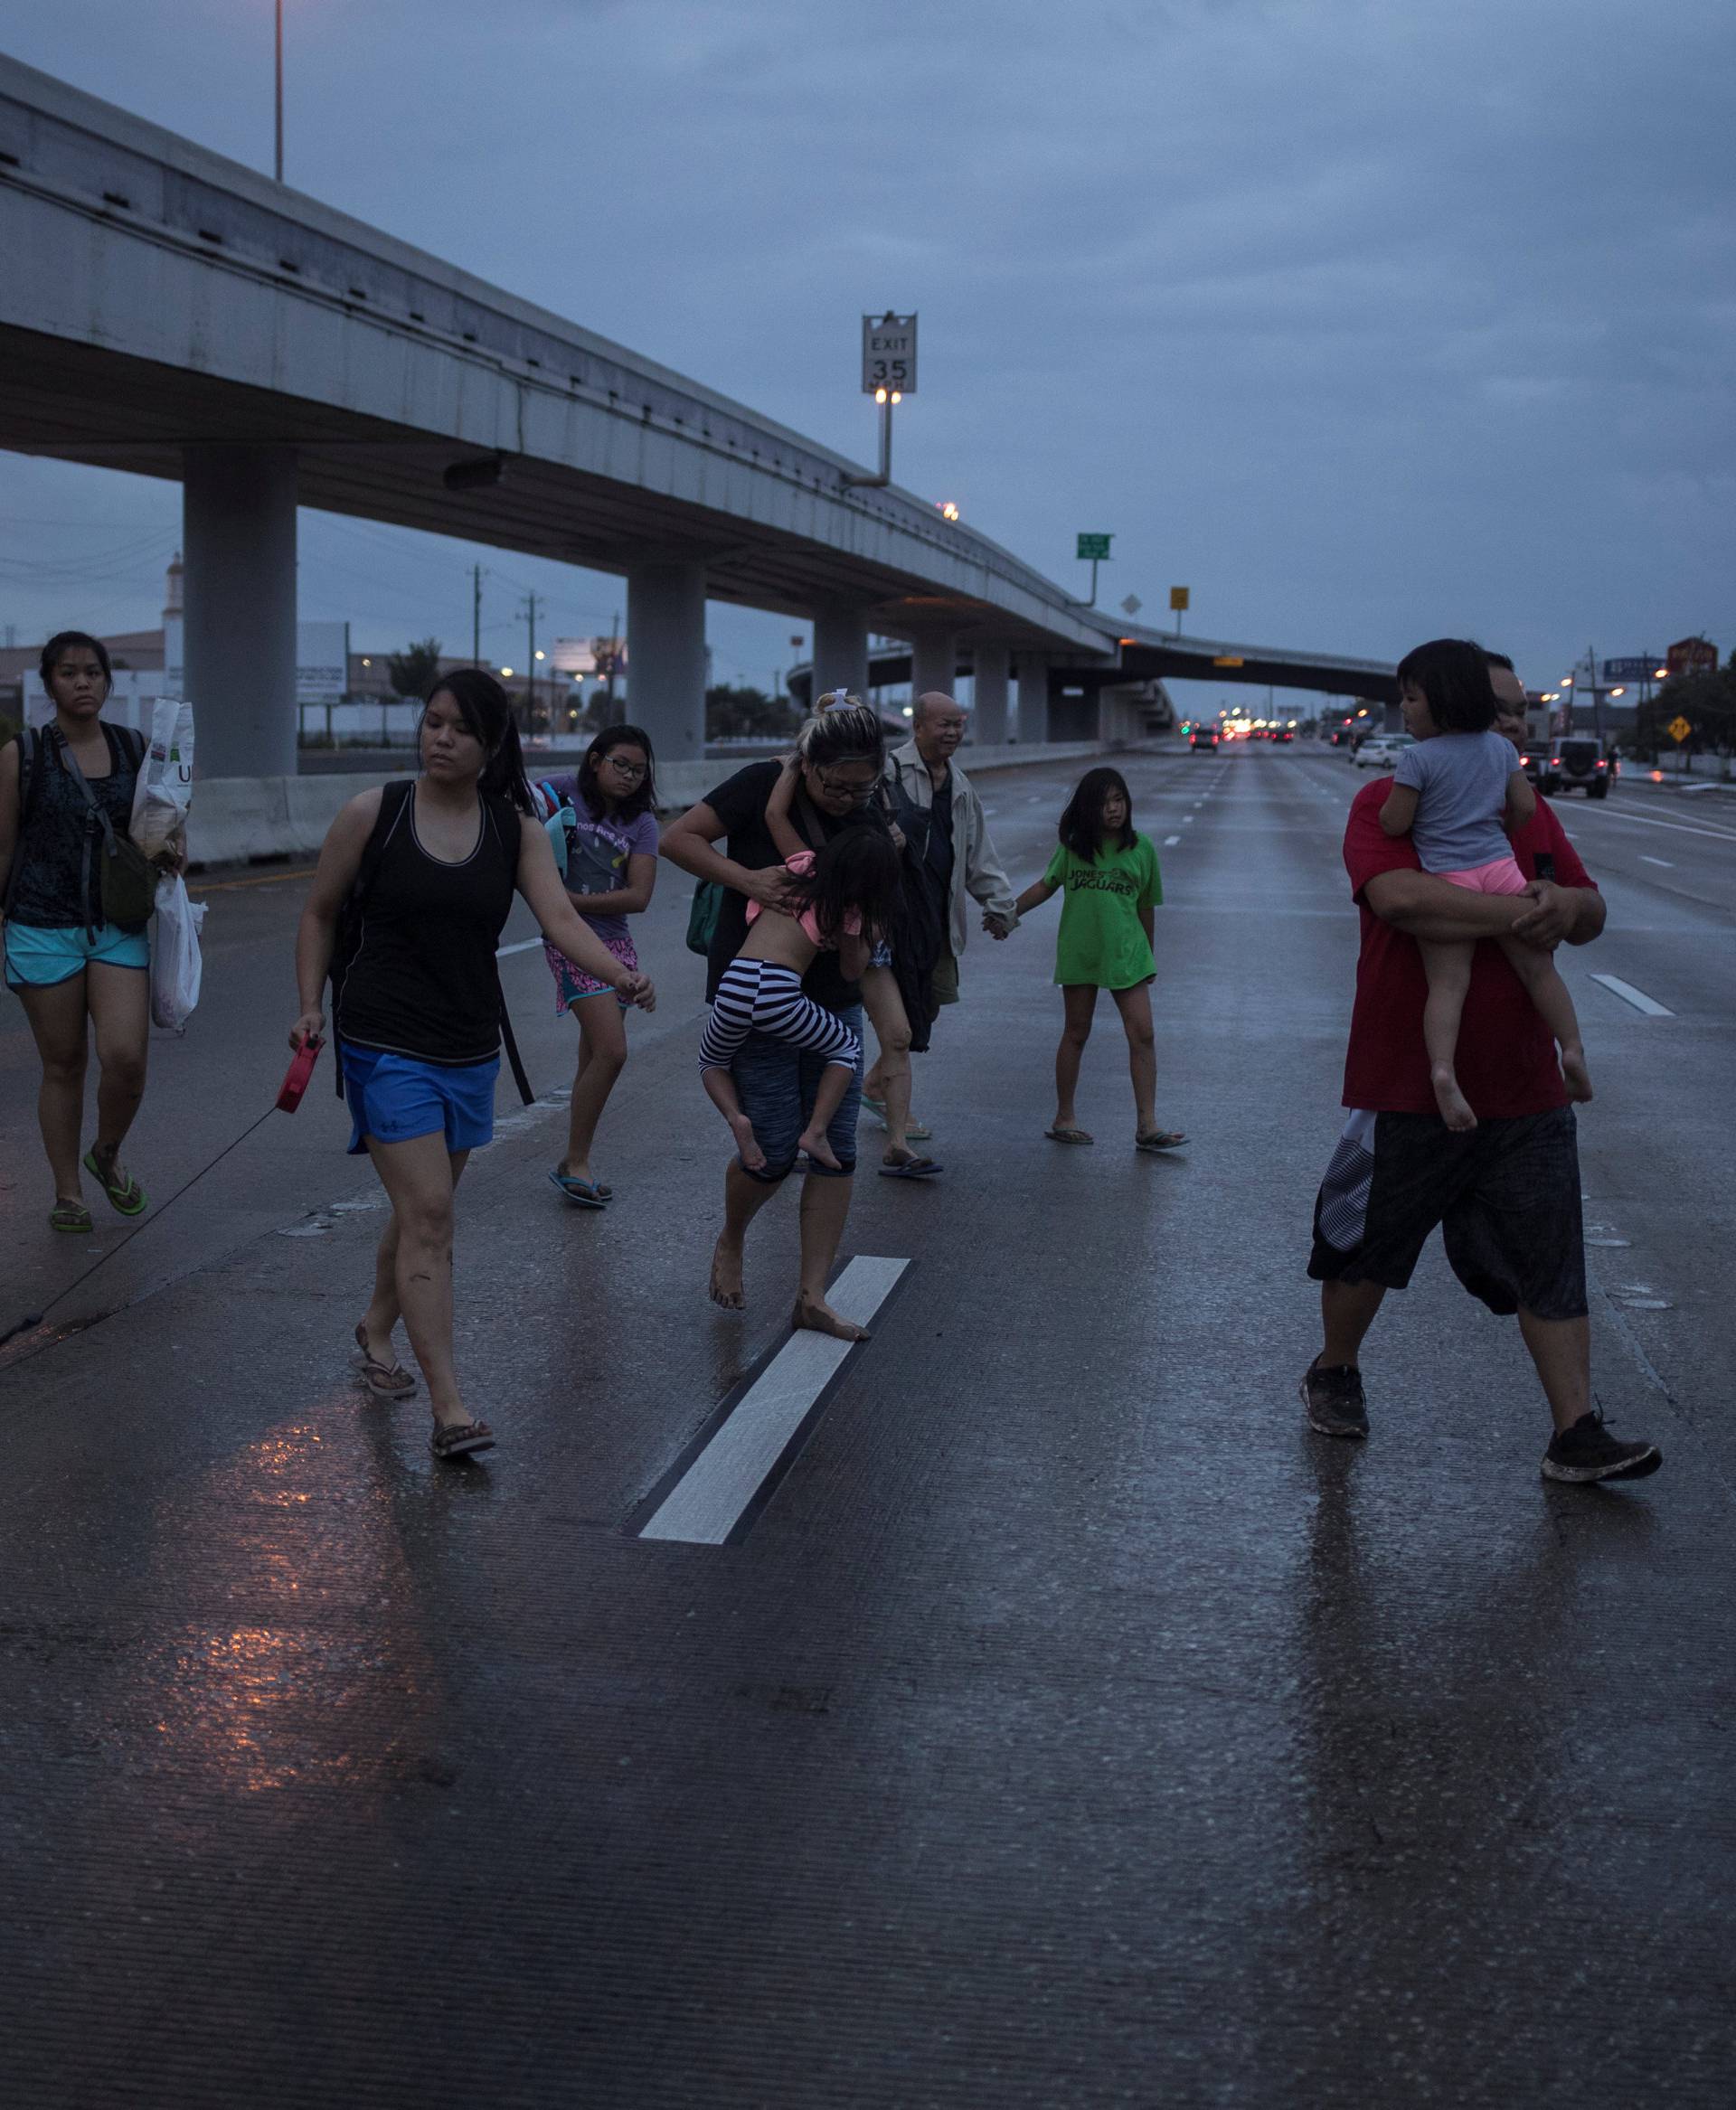 The Duong family, with children, parents and dog in tow, walks along Interstate 45 while escaping flood waters from Tropical Storm Harvey in Houston